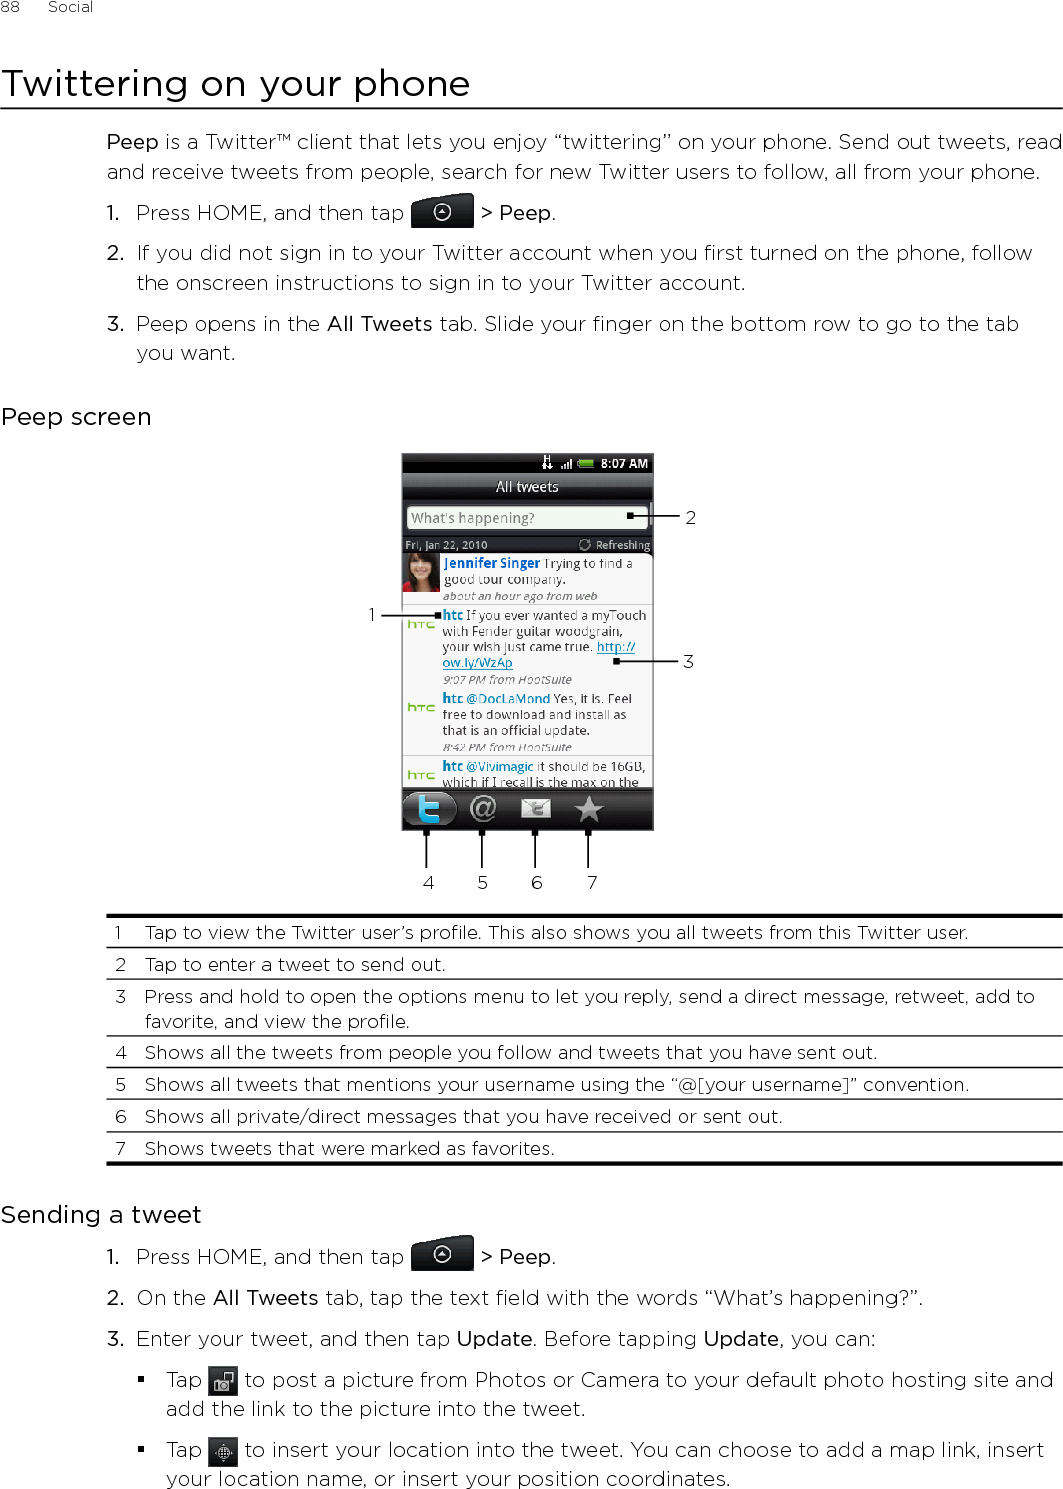 88      Social      Twittering on your phonePeep is a Twitter™ client that lets you enjoy “twittering’’ on your phone. Send out tweets, read and receive tweets from people, search for new Twitter users to follow, all from your phone.1.  Press HOME, and then tap  &gt; Peep.2.  If you did not sign in to your Twitter account when you first turned on the phone, follow the onscreen instructions to sign in to your Twitter account.3.  Peep opens in the All Tweets tab. Slide your finger on the bottom row to go to the tab you want.Peep screen2345 6 711  Tap to view the Twitter user’s profile. This also shows you all tweets from this Twitter user. 2  Tap to enter a tweet to send out. 3  Press and hold to open the options menu to let you reply, send a direct message, retweet, add to favorite, and view the profile.4  Shows all the tweets from people you follow and tweets that you have sent out. 5  Shows all tweets that mentions your username using the “@[your username]” convention. 6  Shows all private/direct messages that you have received or sent out. 7  Shows tweets that were marked as favorites.Sending a tweetPress HOME, and then tap  &gt; Peep.On the All Tweets tab, tap the text field with the words “What’s happening?”.    Enter your tweet, and then tap Update. Before tapping Update, you can: Tap   to post a picture from Photos or Camera to your default photo hosting site and add the link to the picture into the tweet.Tap   to insert your location into the tweet. You can choose to add a map link, insert your location name, or insert your position coordinates.1.2.3.